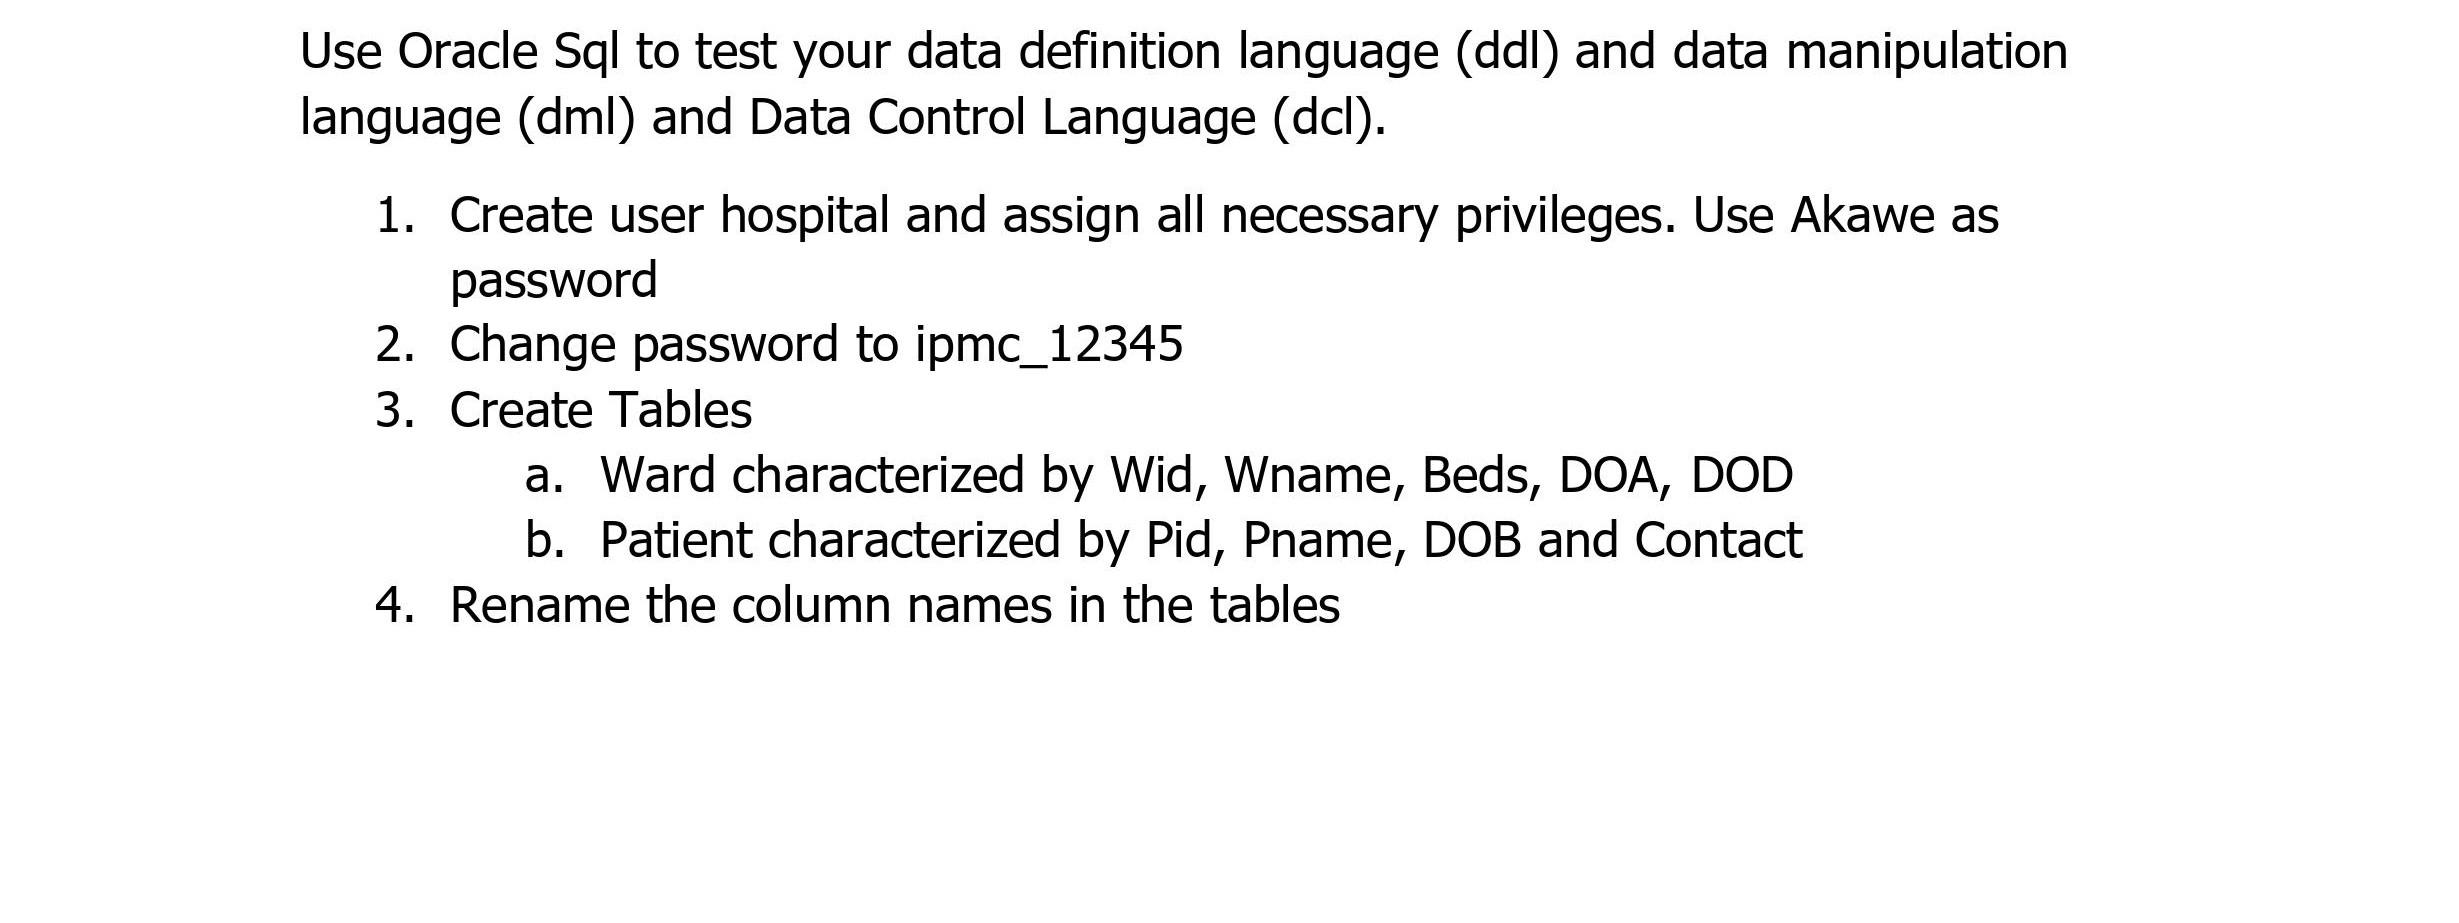 Use Oracle Sql to test your data definition language (ddl) and data manipulation language (dml) and Data